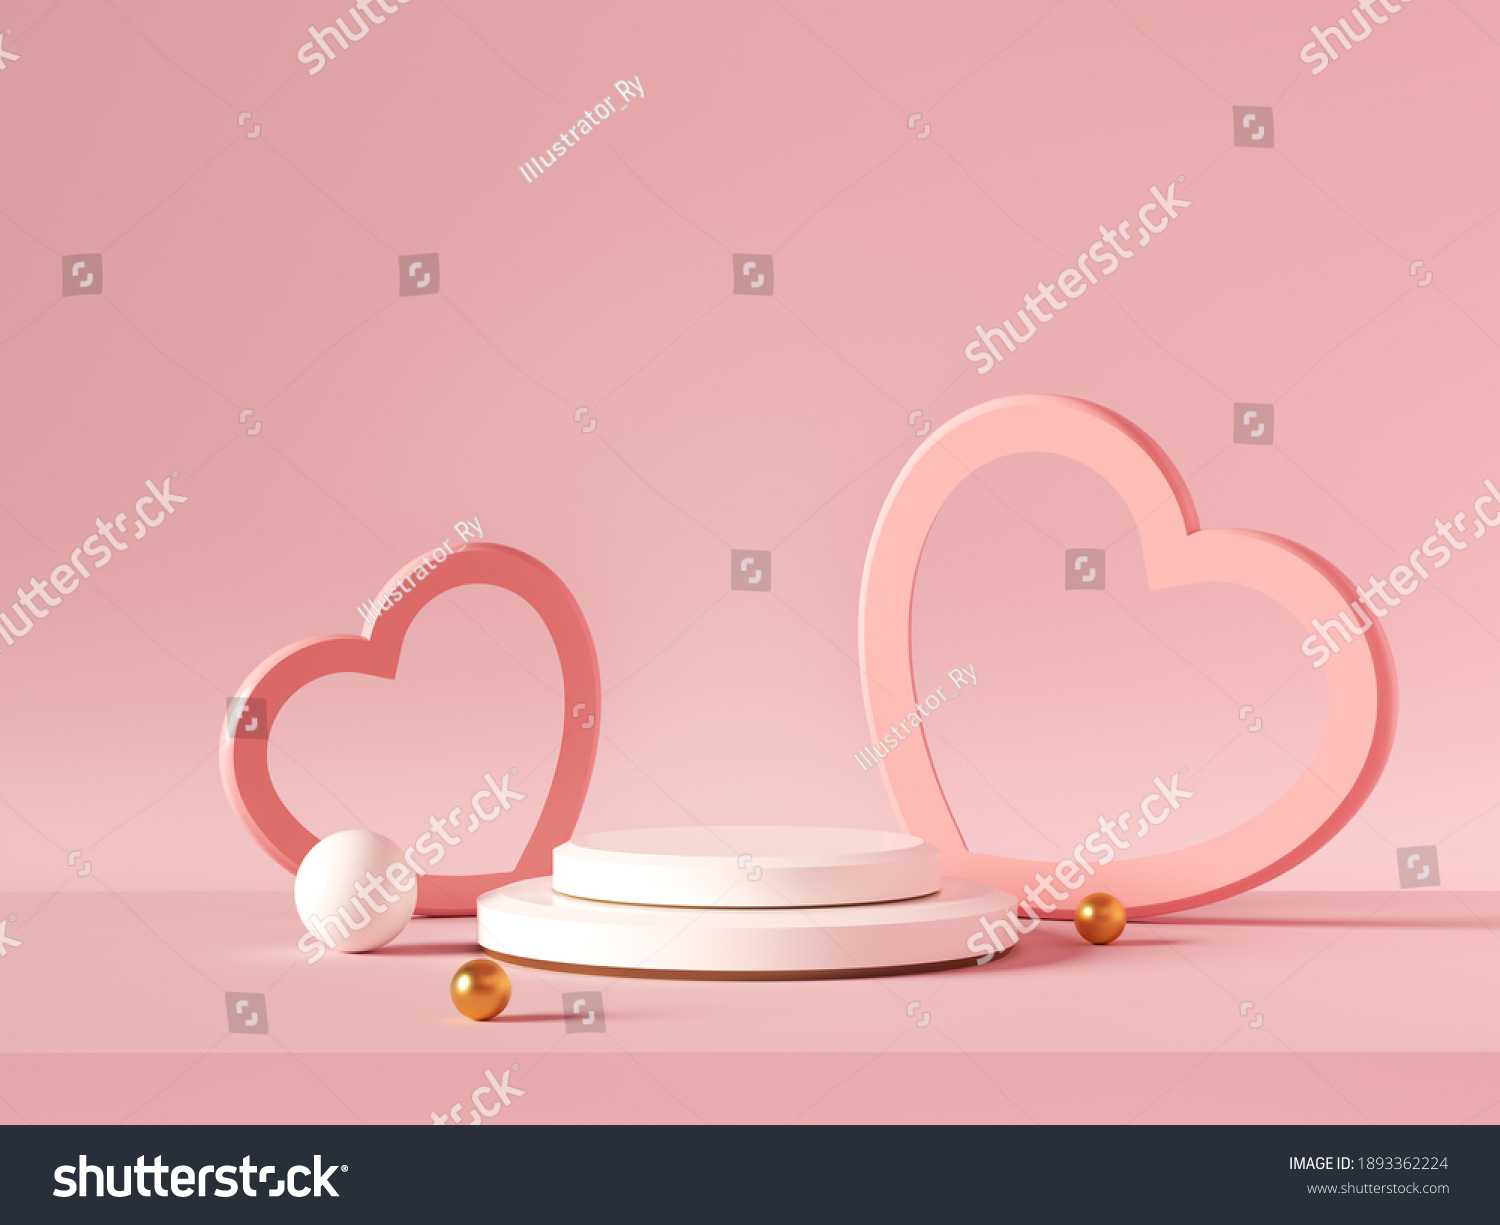 Minimal background, mock up with podium for product display,Abstract white geometry shape background minimalist Valentine's day pink background,Abstract mock up backgroundup 3D rendering. #1893362224